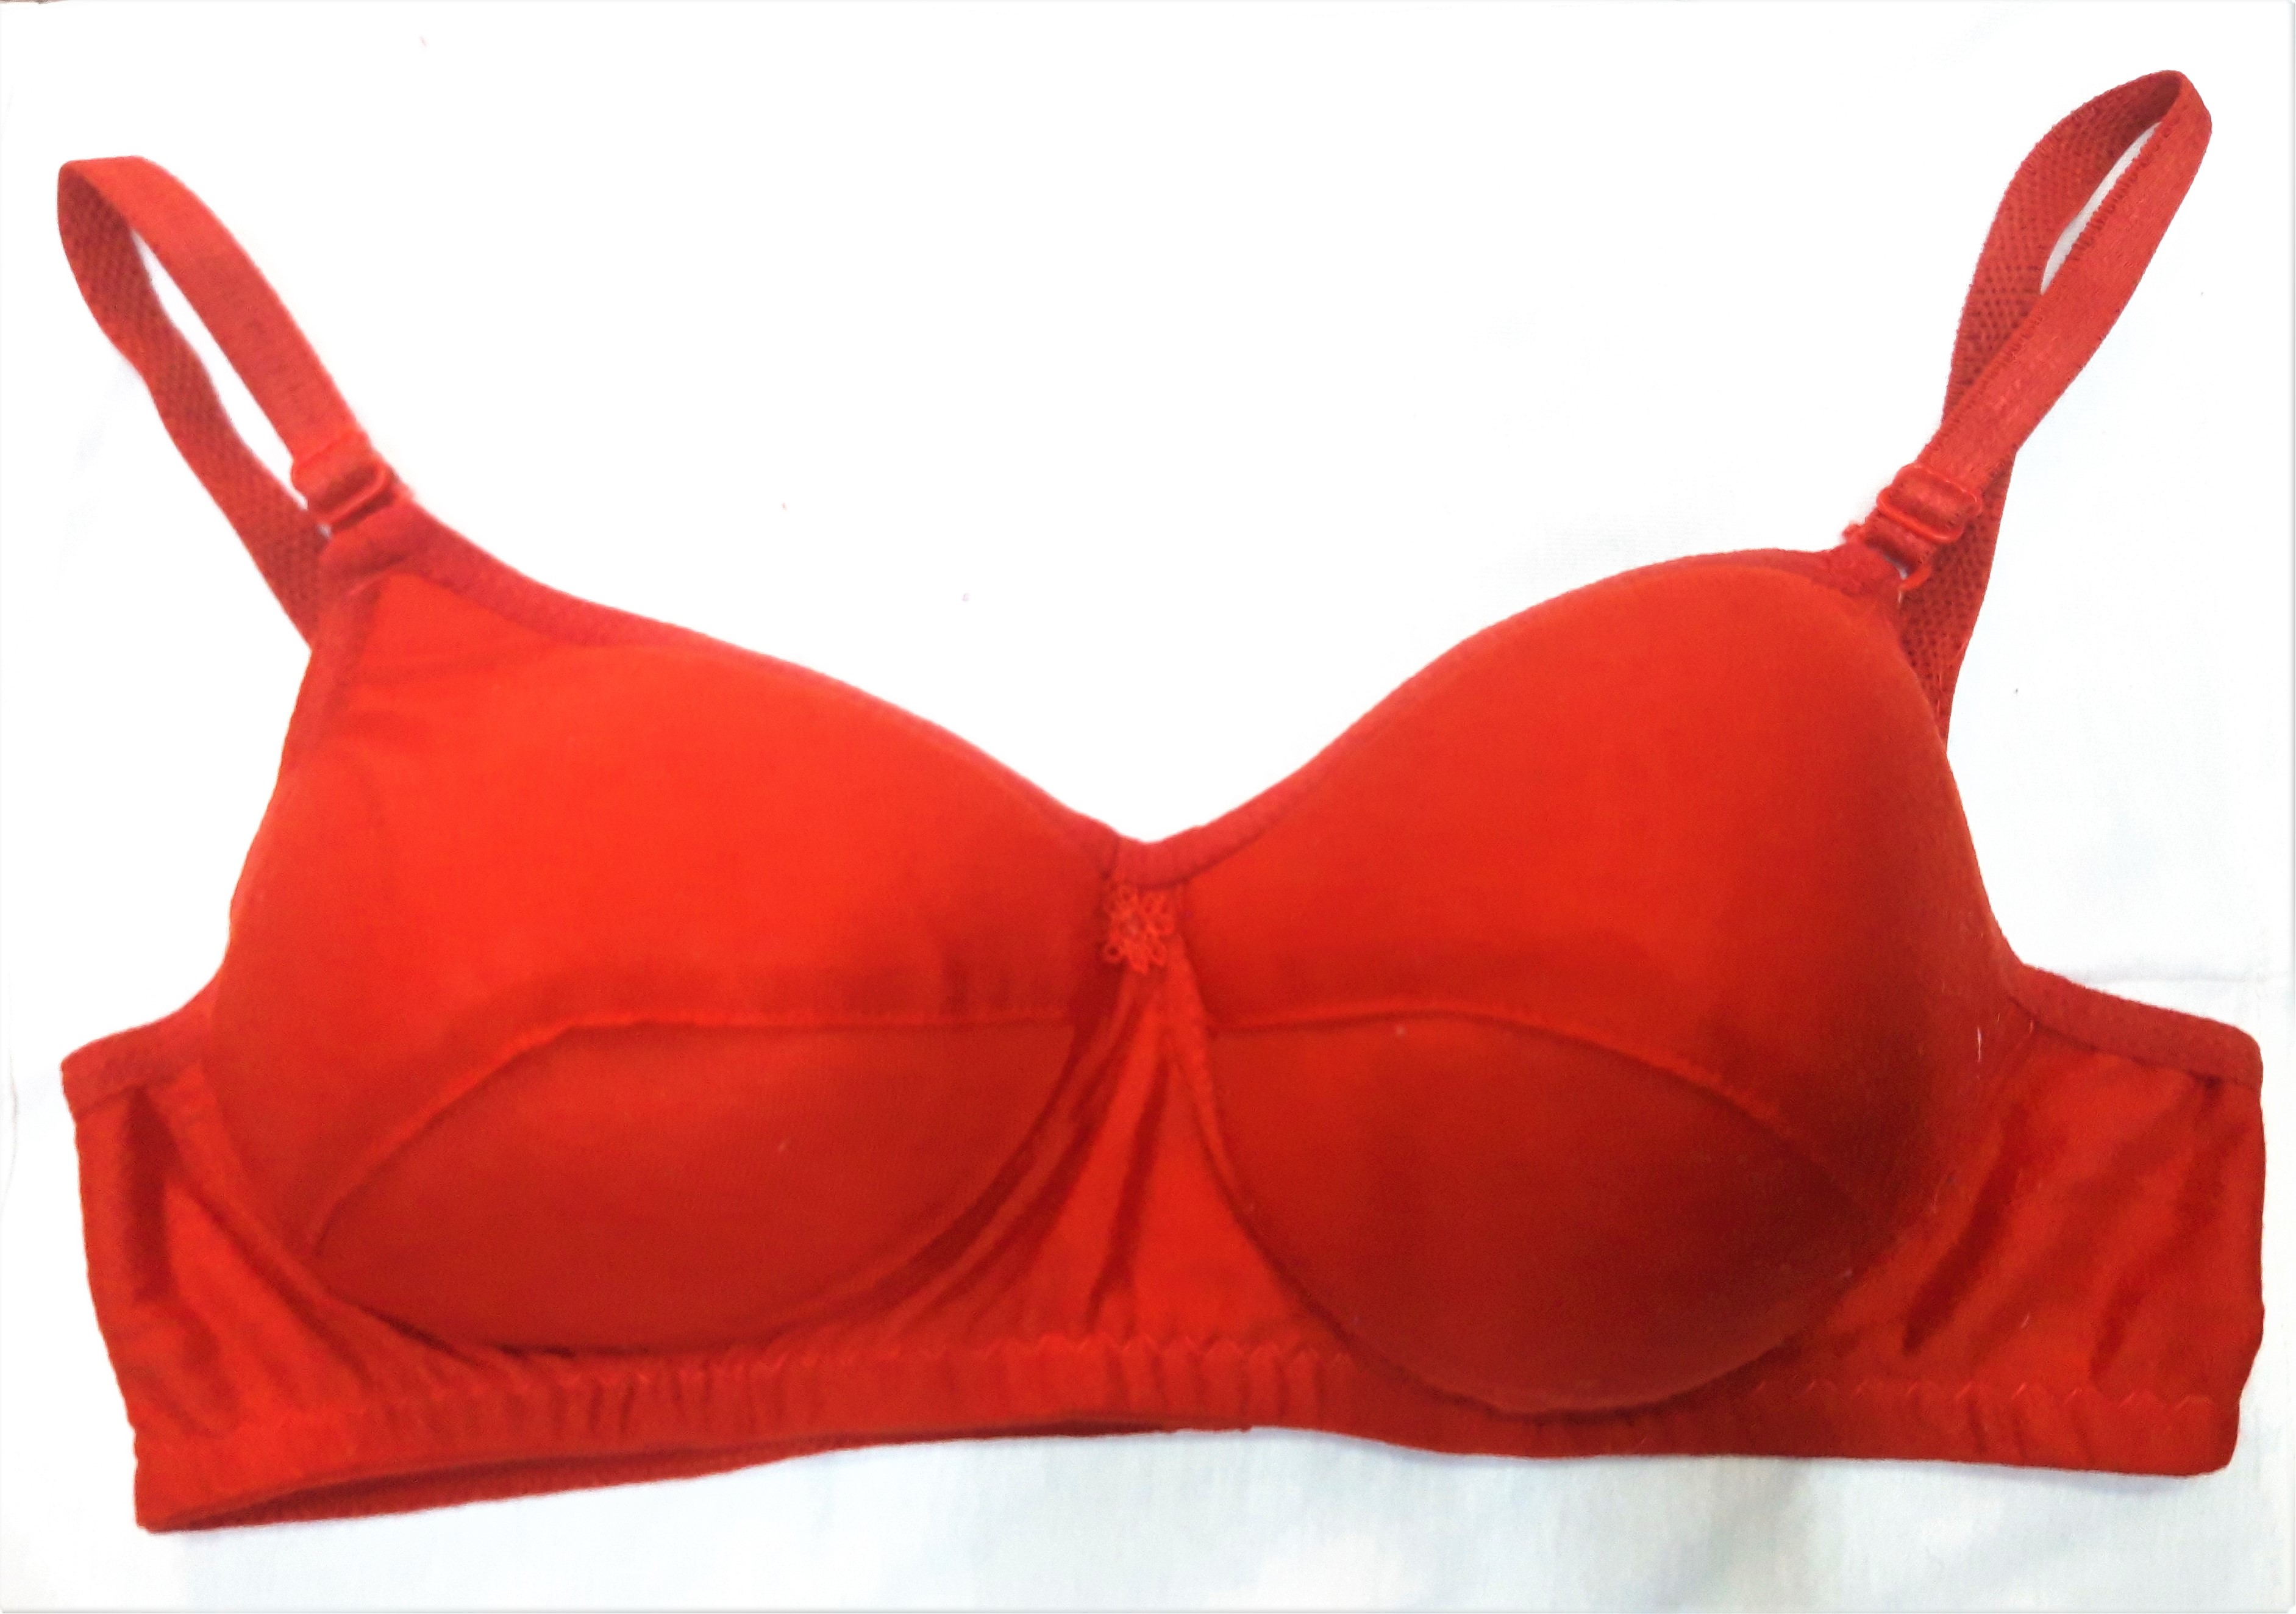 Buy PADDED BRA PACK OF 3 Online @ ₹315 from ShopClues